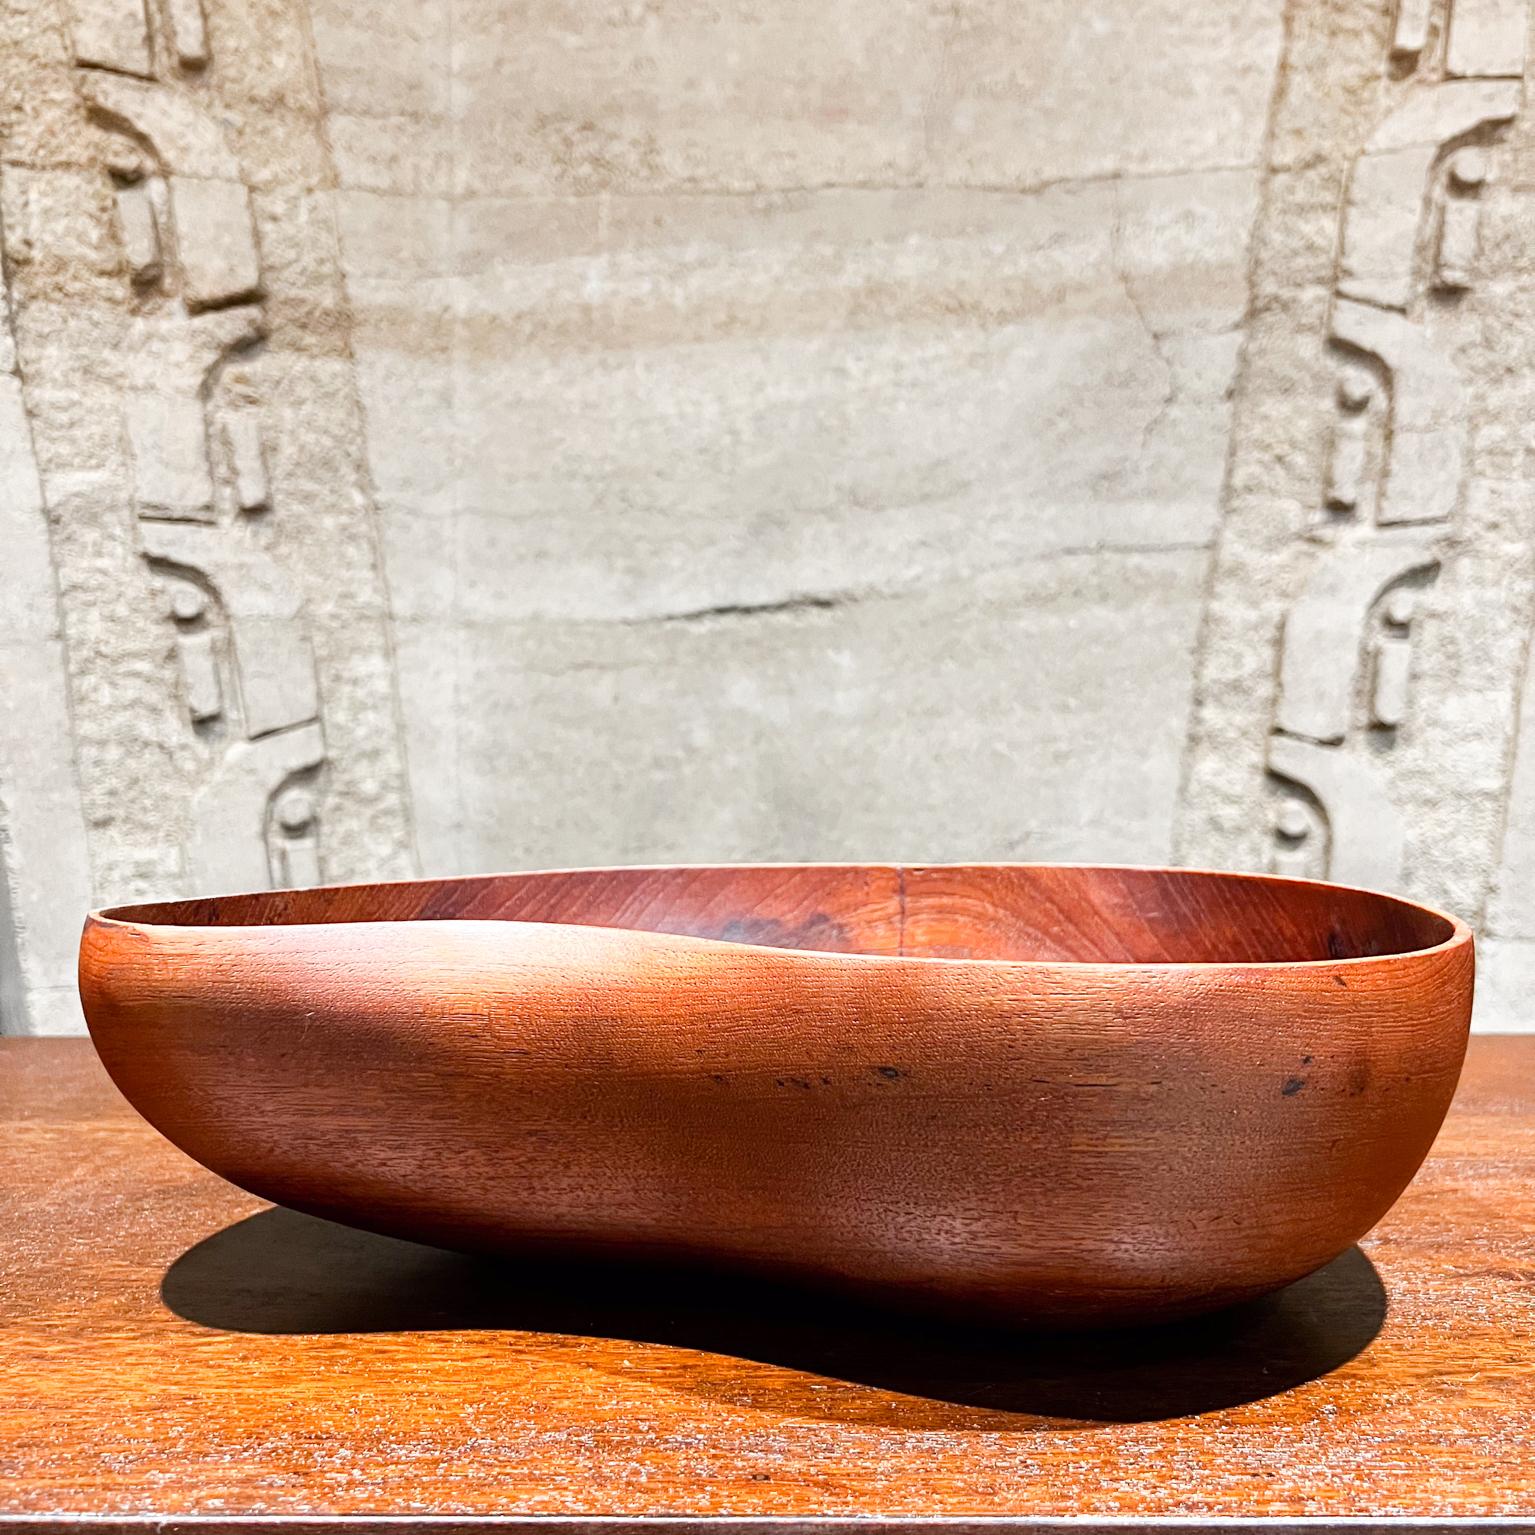 1970s Vintage Biomorphic Teak Wood Bowl
4.25 tall x 15.25 w x 10.25 d
Original preowned vintage condition.
See all images.
